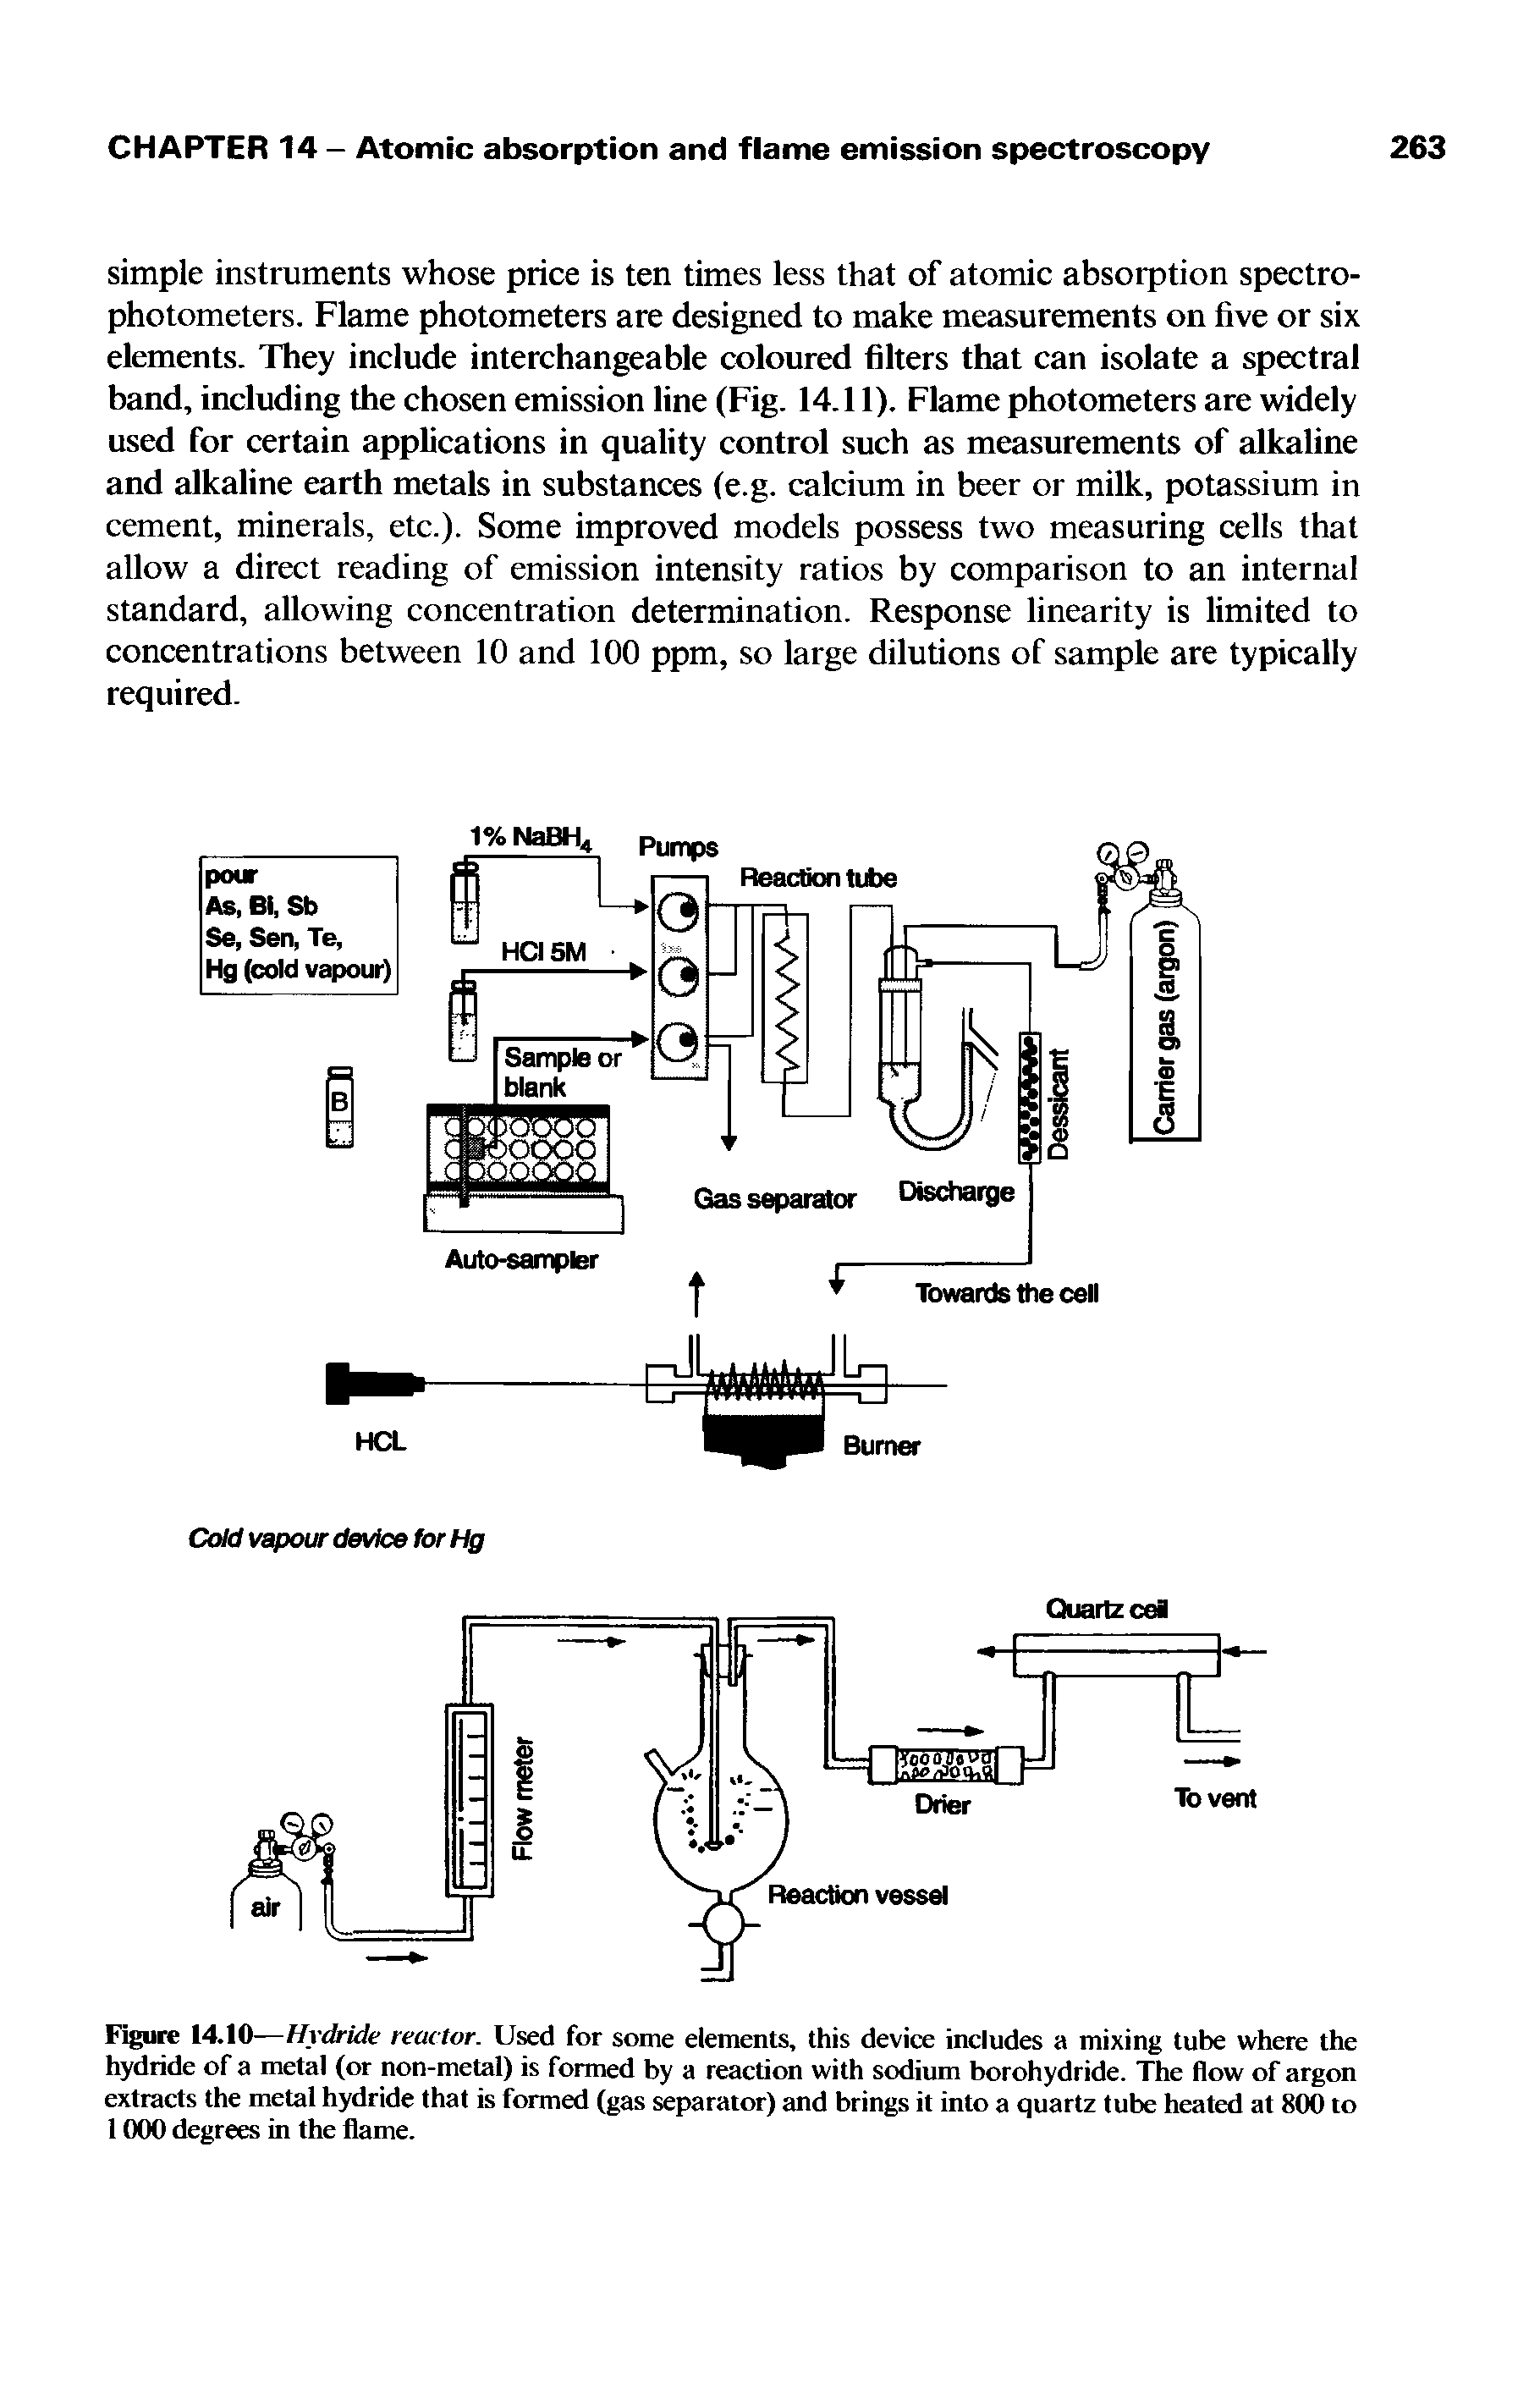 Figure 14.10—Hydride reactor. Used for some elements, this device includes a mixing tube where the hydride of a metal (or non-metal) is formed by a reaction with sodium borohydride. The flow of argon extracts the metal hydride that is formed (gas separator) and brings it into a quartz tube heated at 800 to 1000 degrees in the flame.